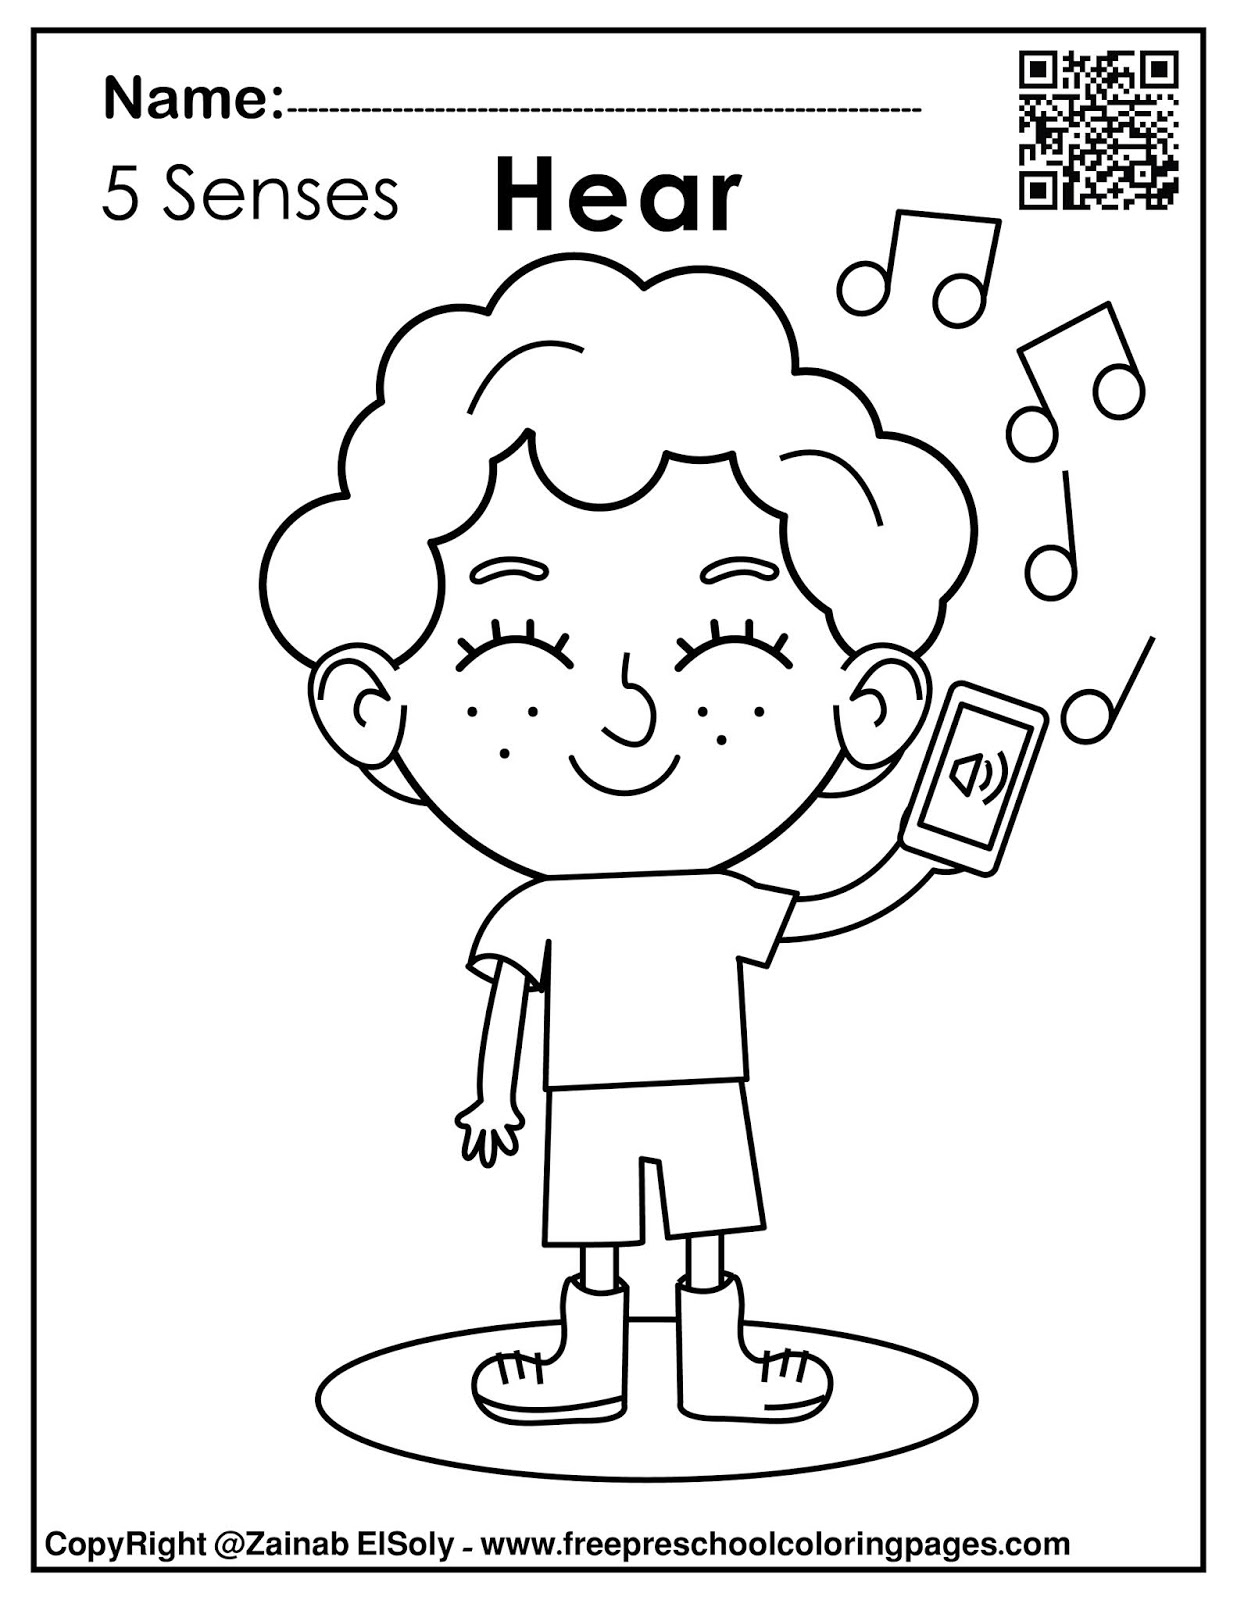 5 Senses Printable Coloring Pages